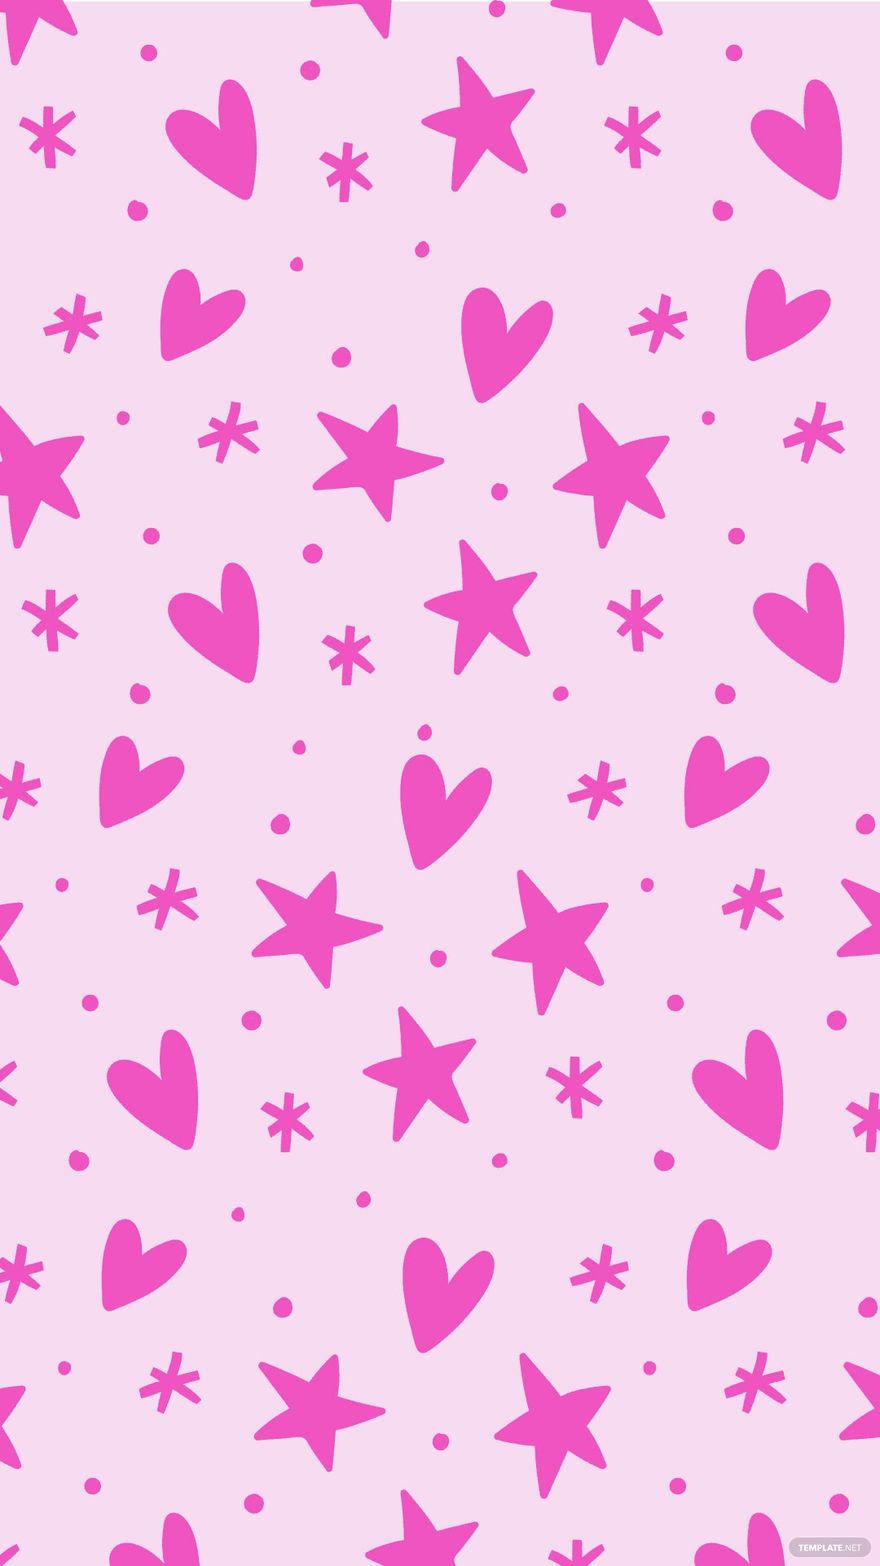 Free Hearts And Stars Background in Illustrator, EPS, SVG, JPG